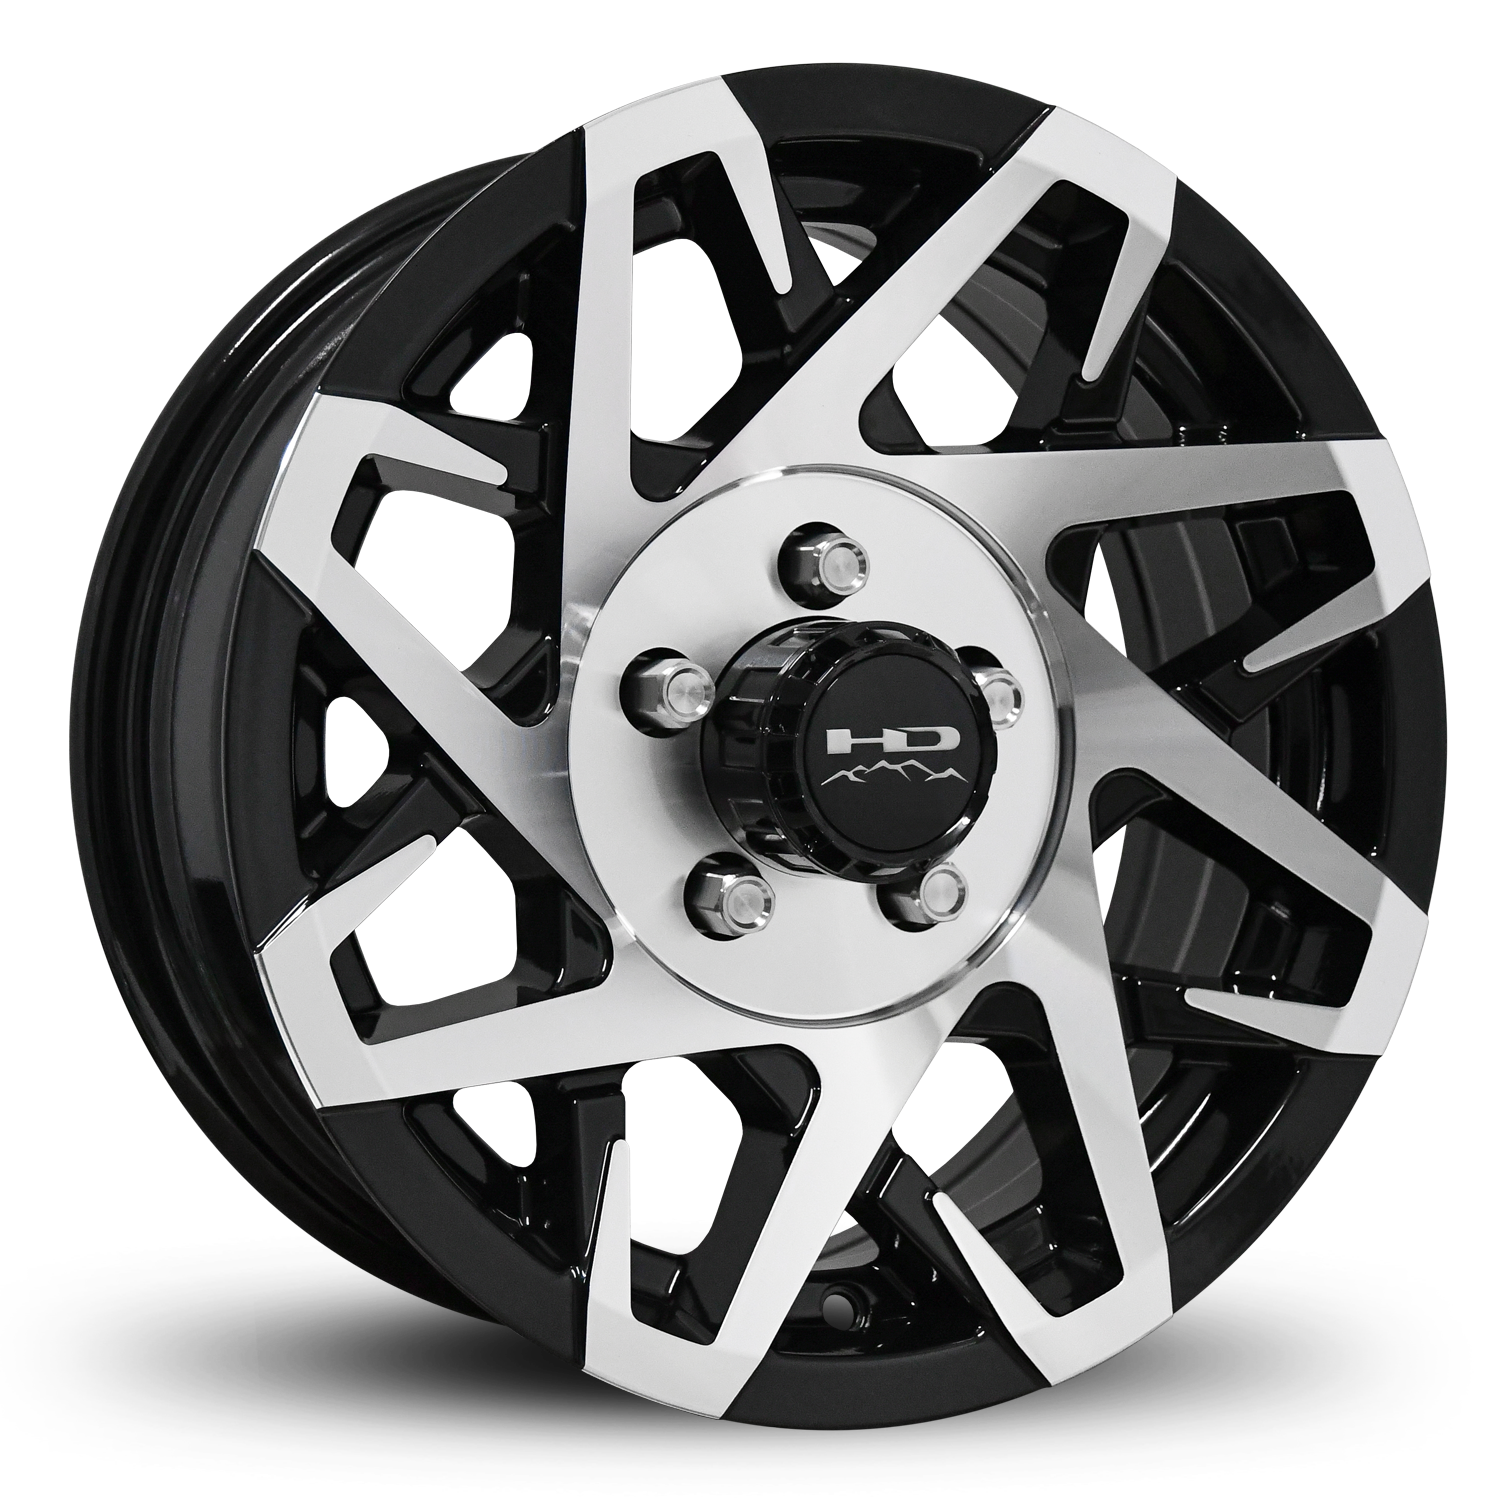 HD Off-Road Canyon Custom Trailer Wheel Rims in 15x6.0  15x6 Gloss Black Machined Face with Center Cap & Logo fits 5x4.50 / 5x114.3 Axle Boat, Car, RV, Travel, Concession, Horse, Utility, Lawn & Garden, & Landscaping.